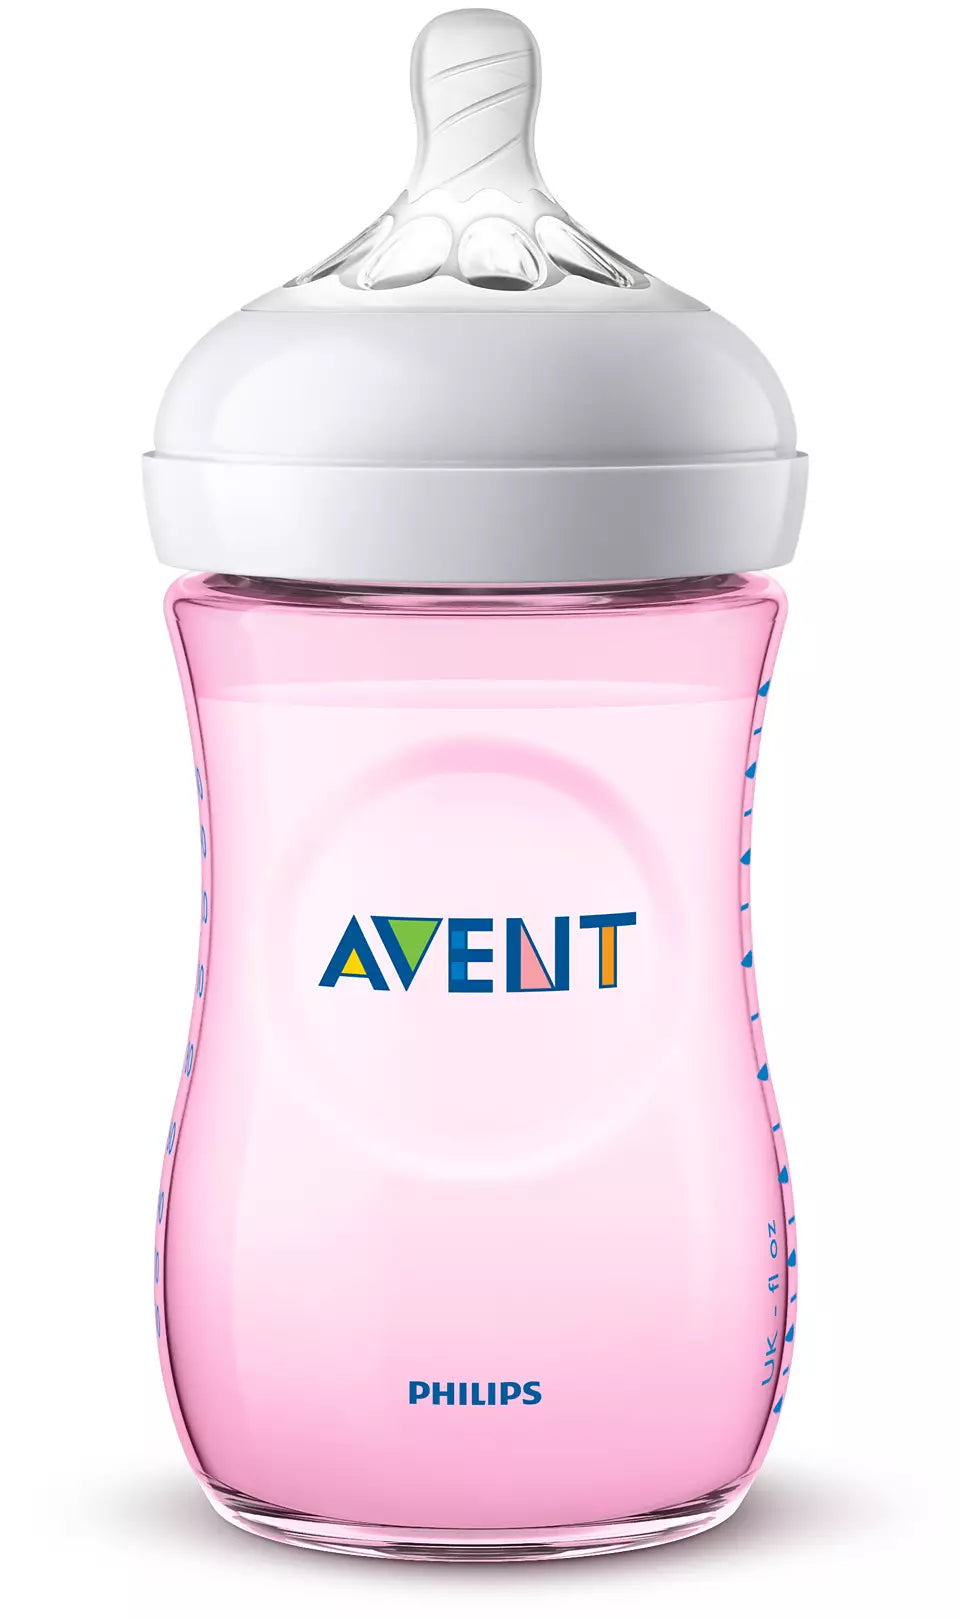 PHILIPS AVENT 2-Piece Natural Feeding Baby Ultra Soft Nipple Bottle Set For Newborn Babies, 260 ml, Pink/White